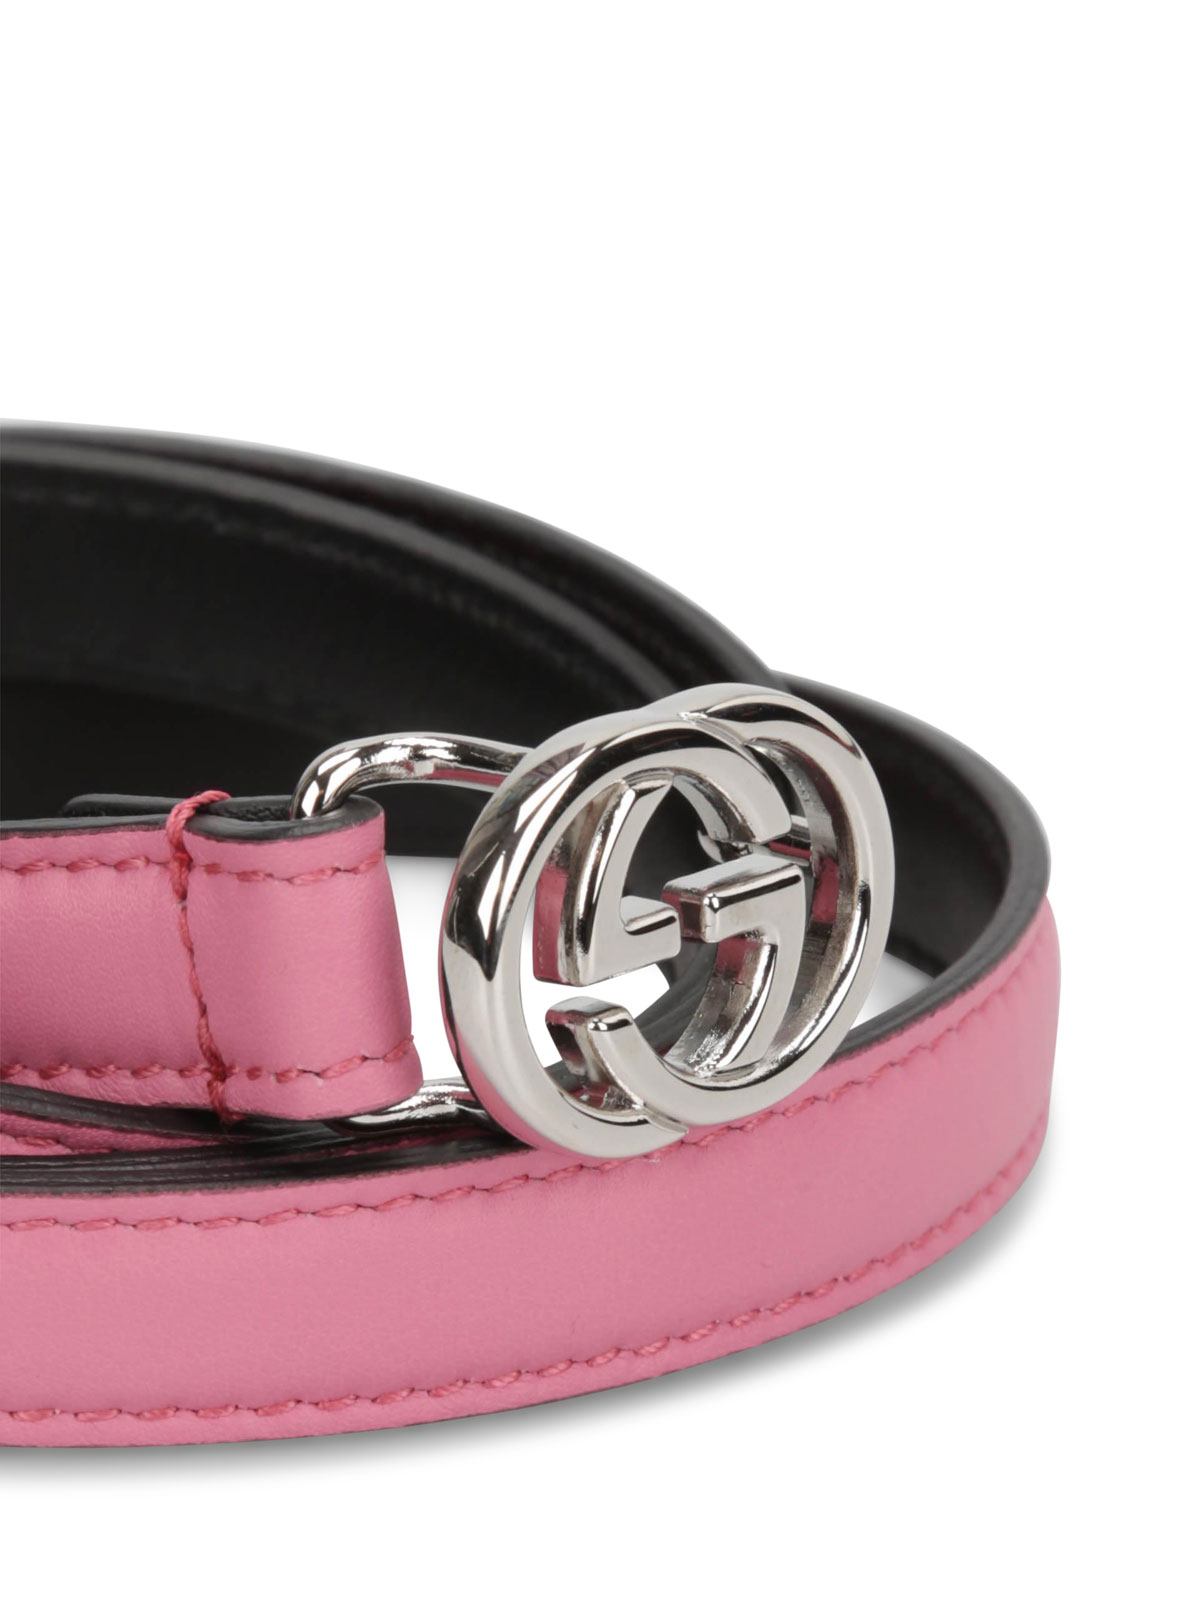 Gucci - GG buckle leather belt - belts - 370552 AP00N 5528 | www.bagssaleusa.com/product-category/classic-bags/